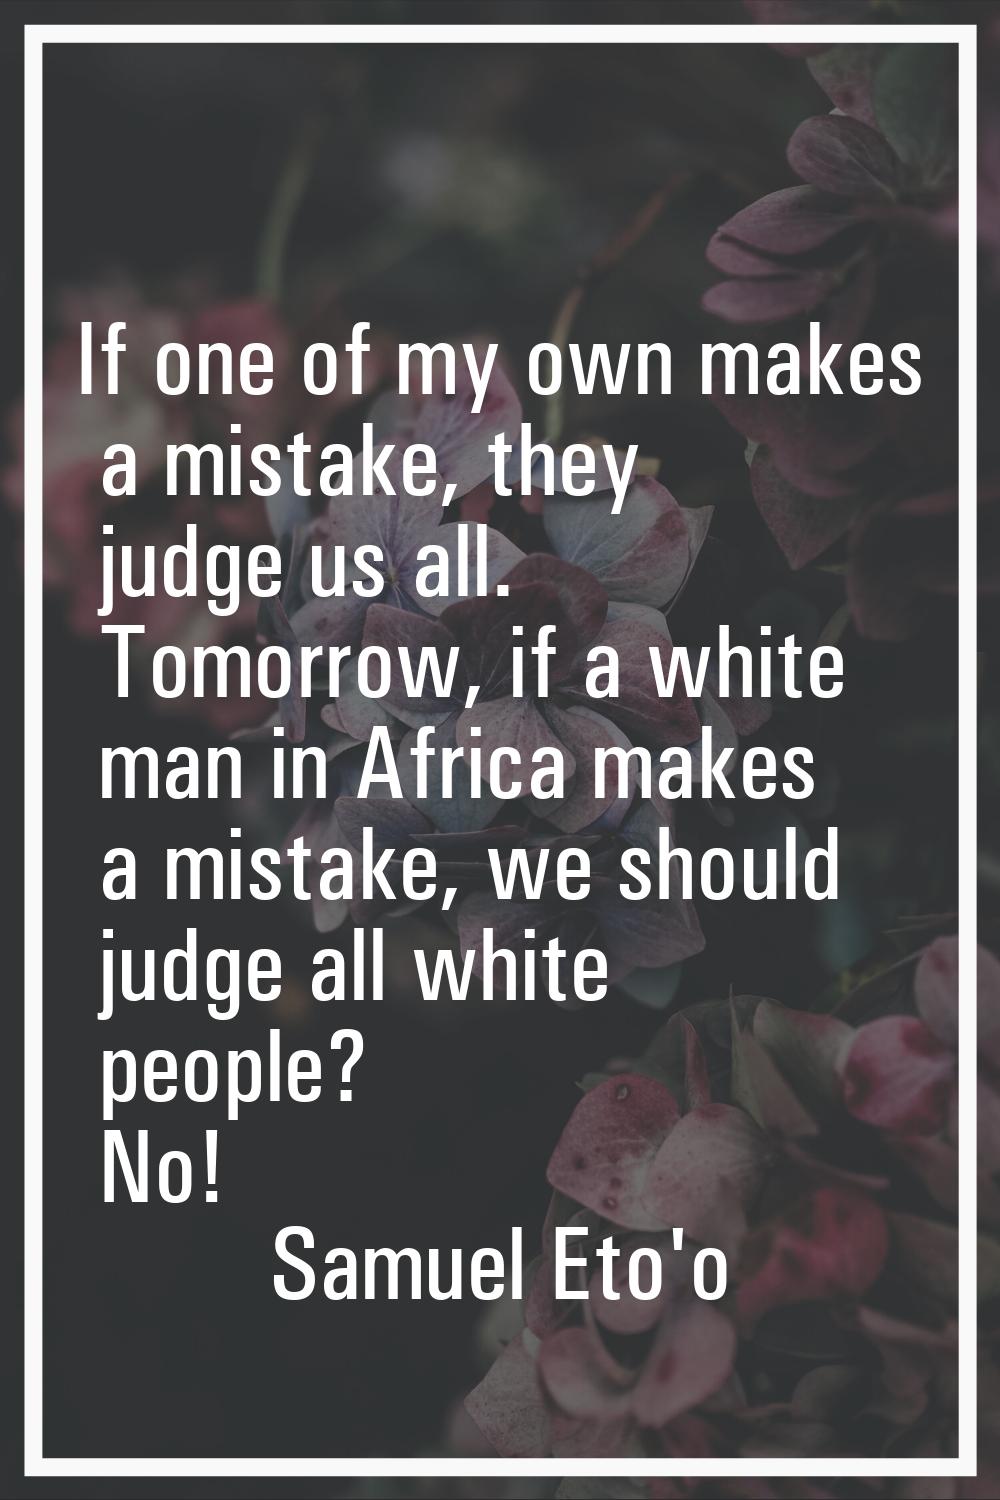 If one of my own makes a mistake, they judge us all. Tomorrow, if a white man in Africa makes a mis